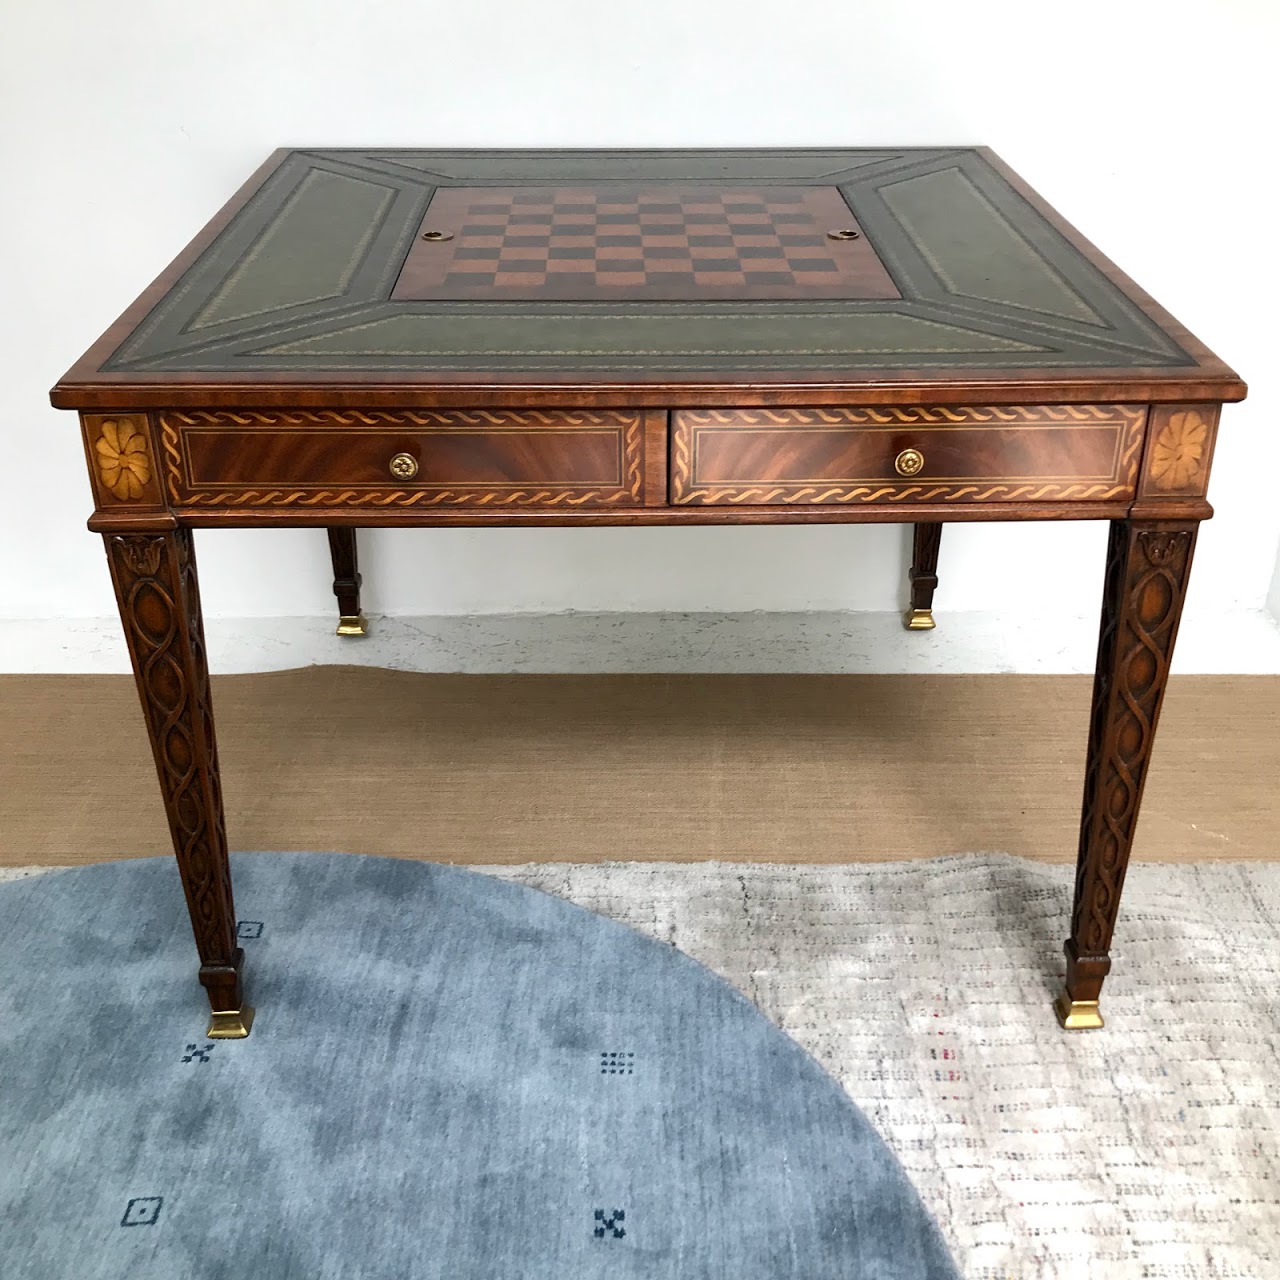 Maitland-Smith Leather-Top Game Table